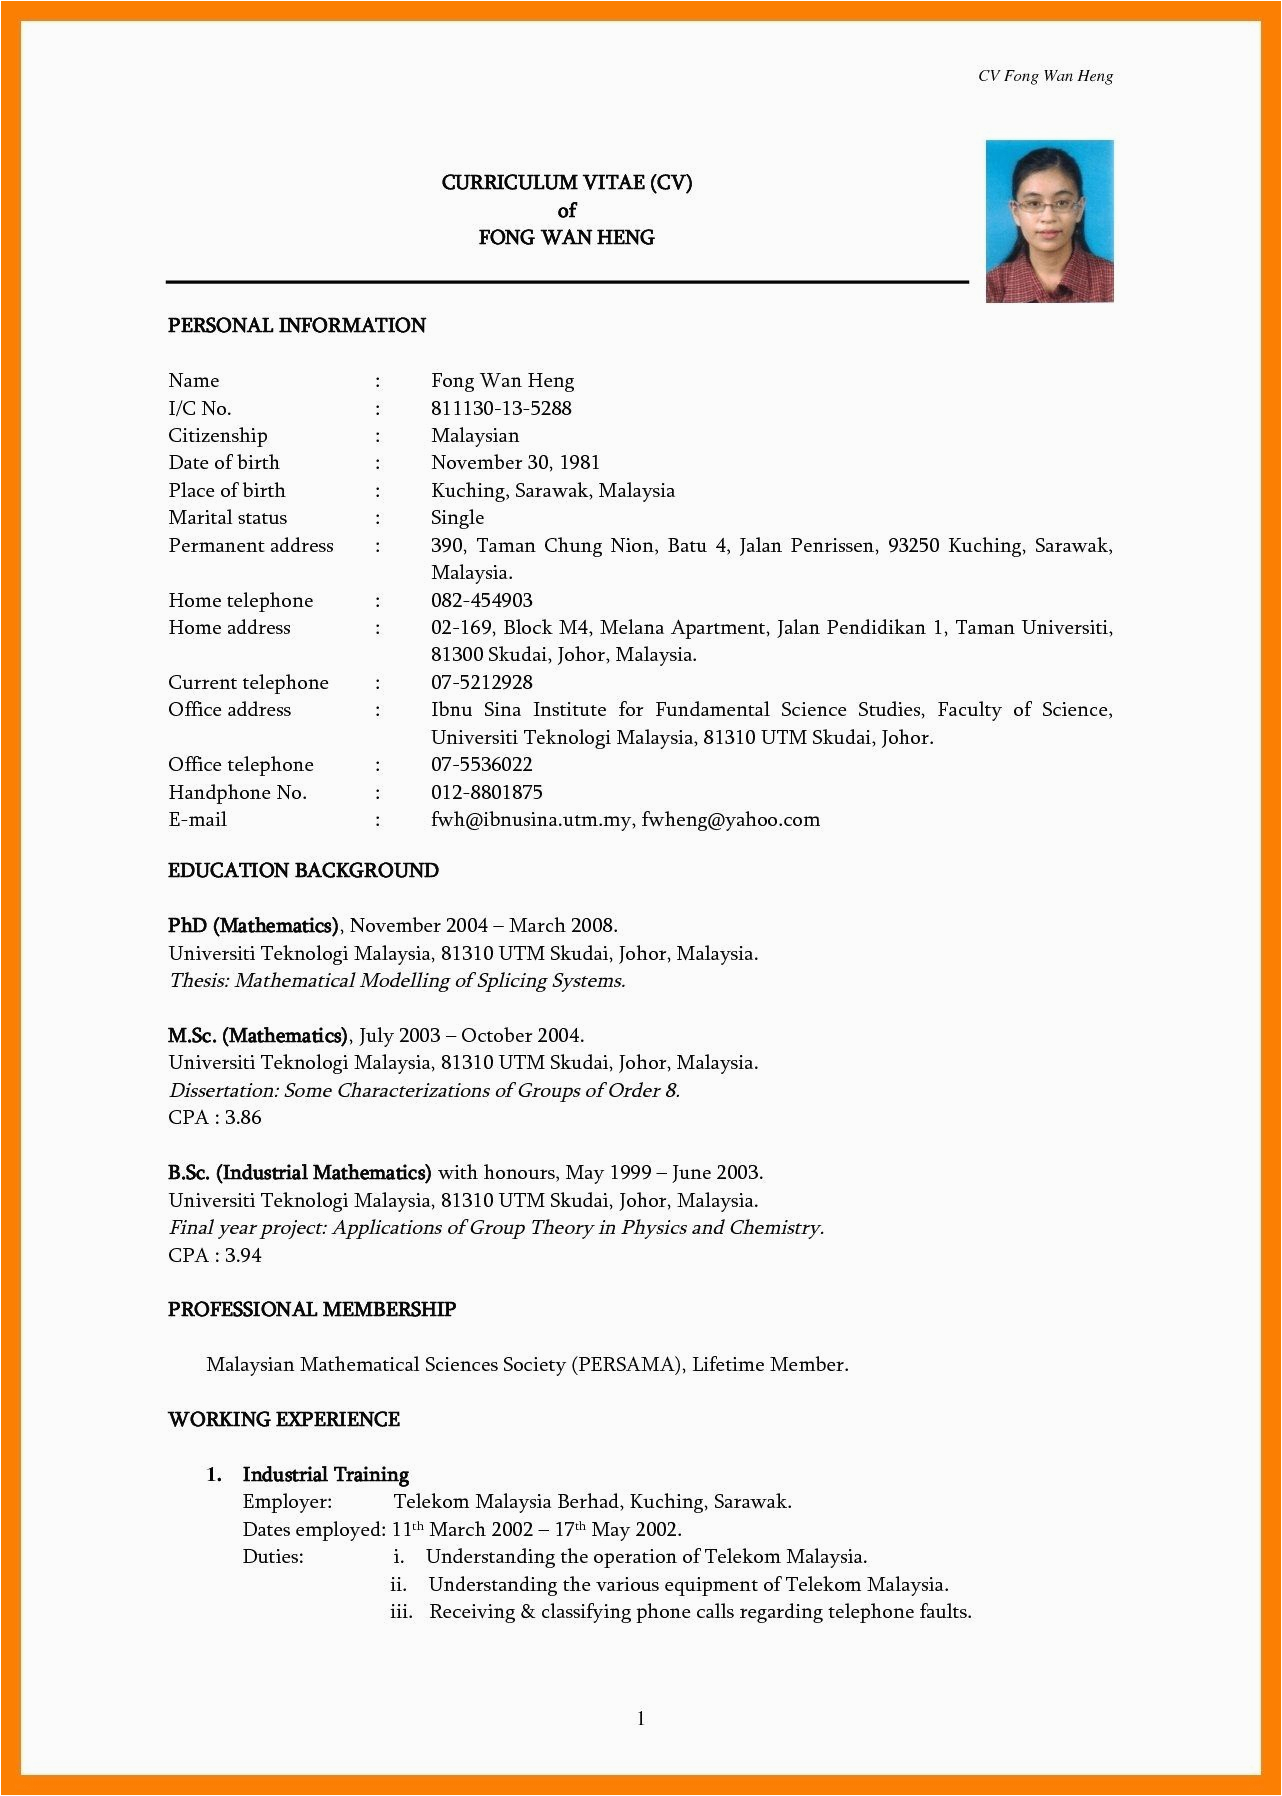 Sample Resume for Fresh Graduate without Work Experience Malaysia Curriculum Vitae Contoh Cv Fresh Graduate Malaysia